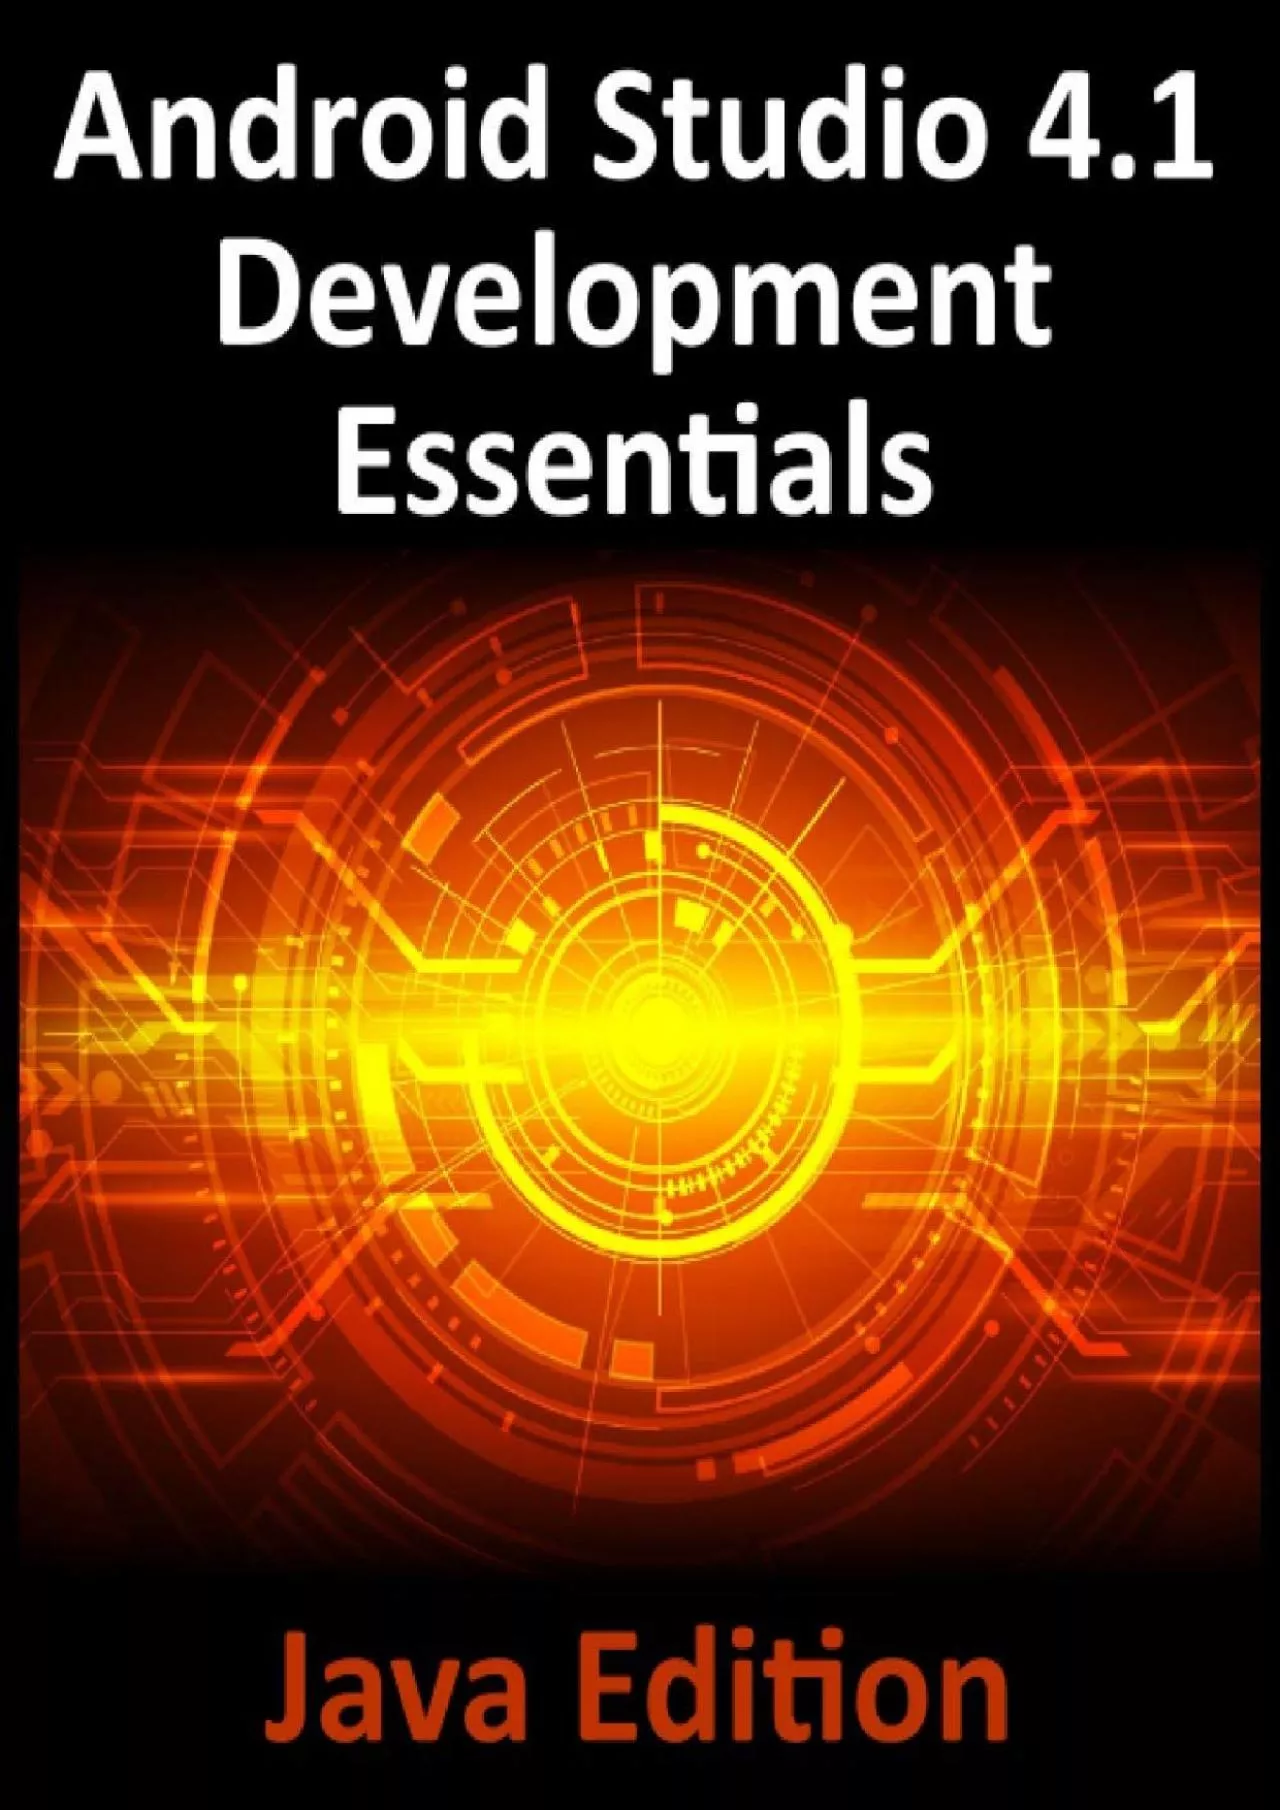 [PDF]-Android Studio 4.1 Development Essentials - Java Edition: Developing Android 11